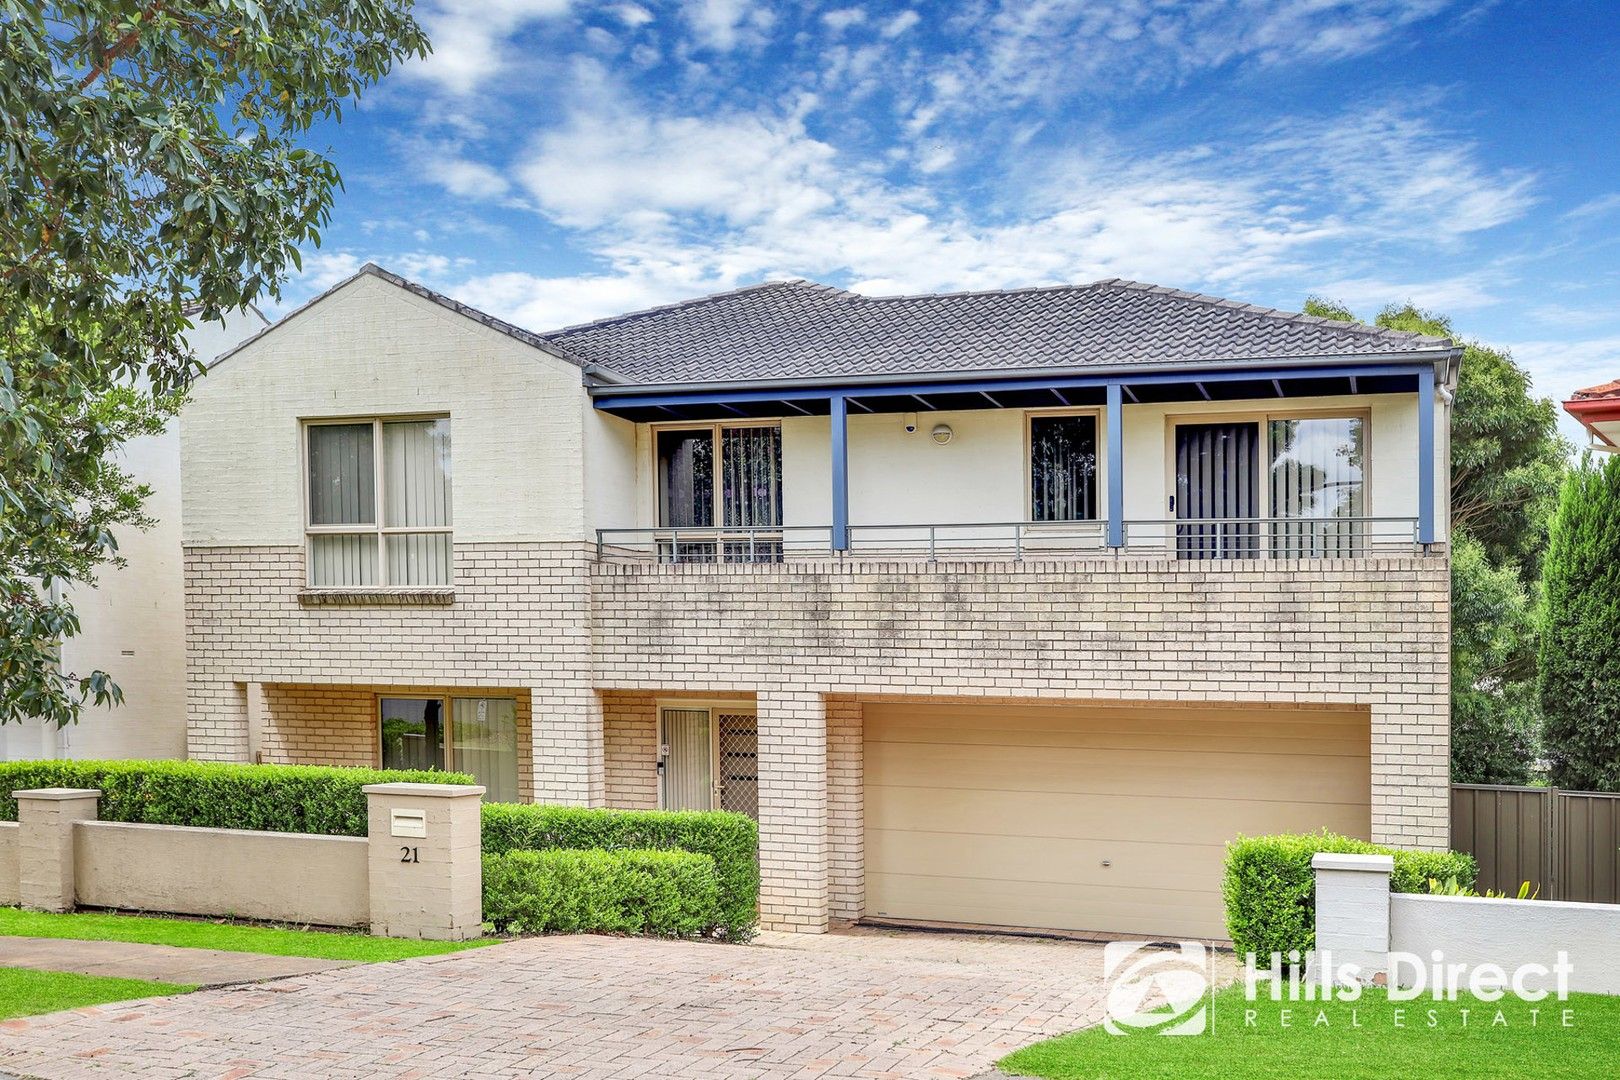 4 bedrooms House in 21 Rochdale Circuit STANHOPE GARDENS NSW, 2768